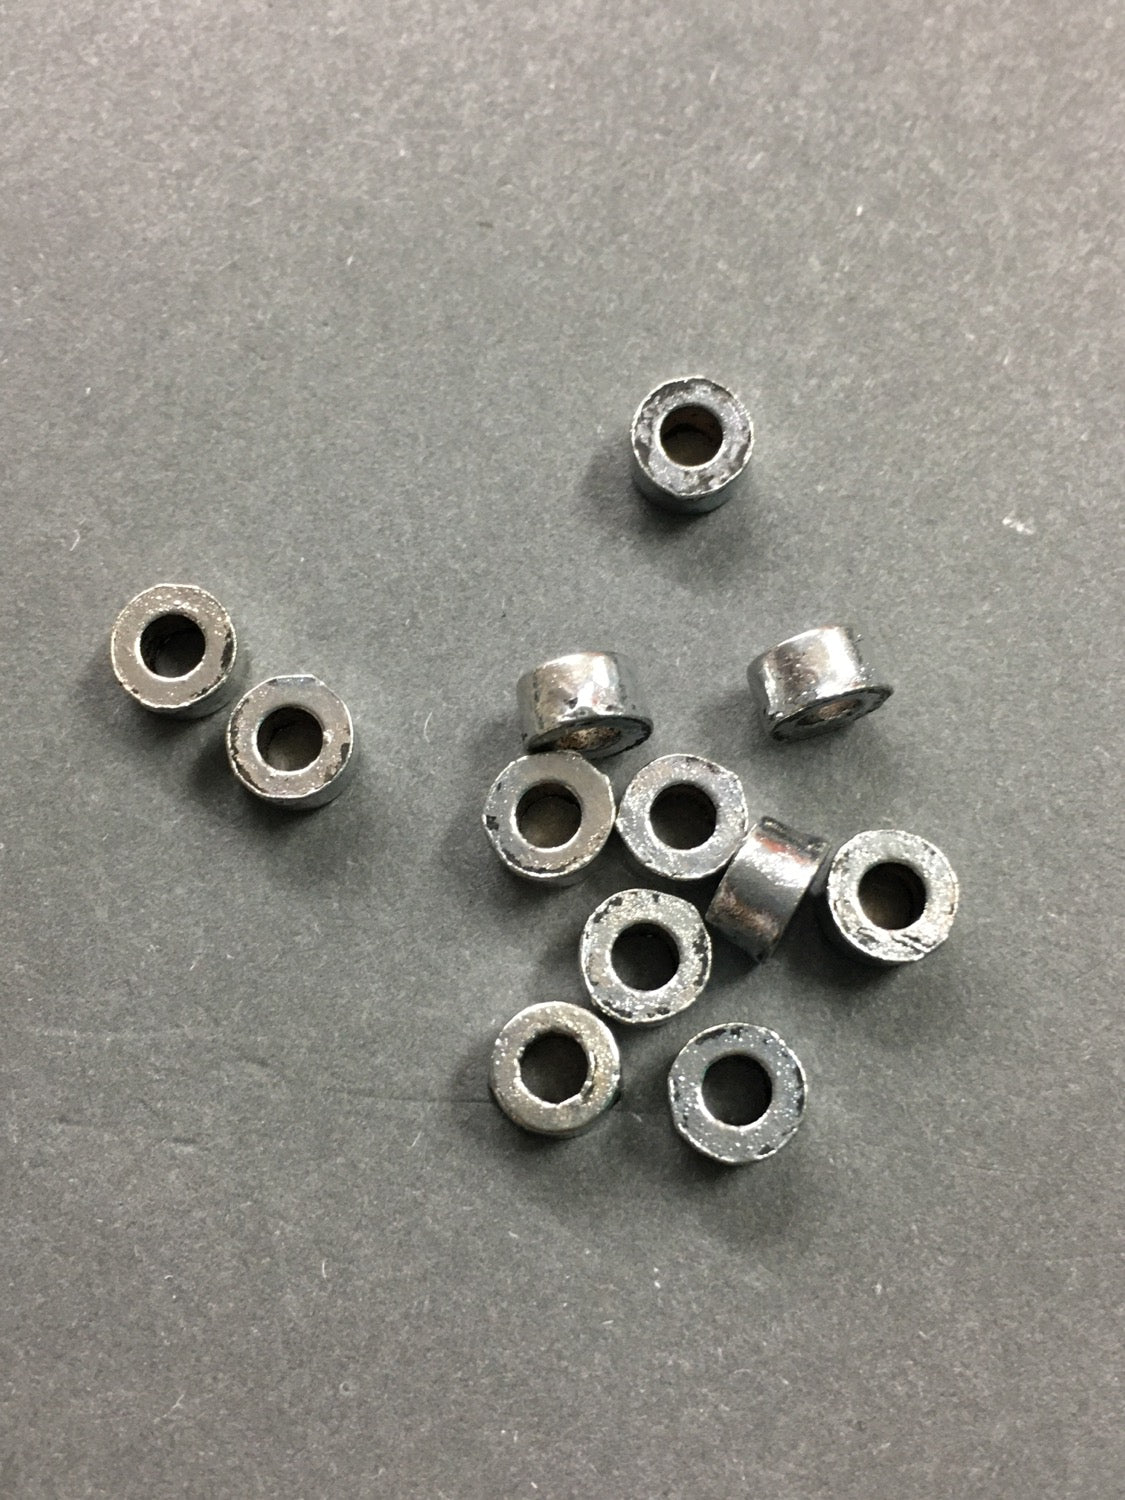 6mm spacer wide hole qty 12